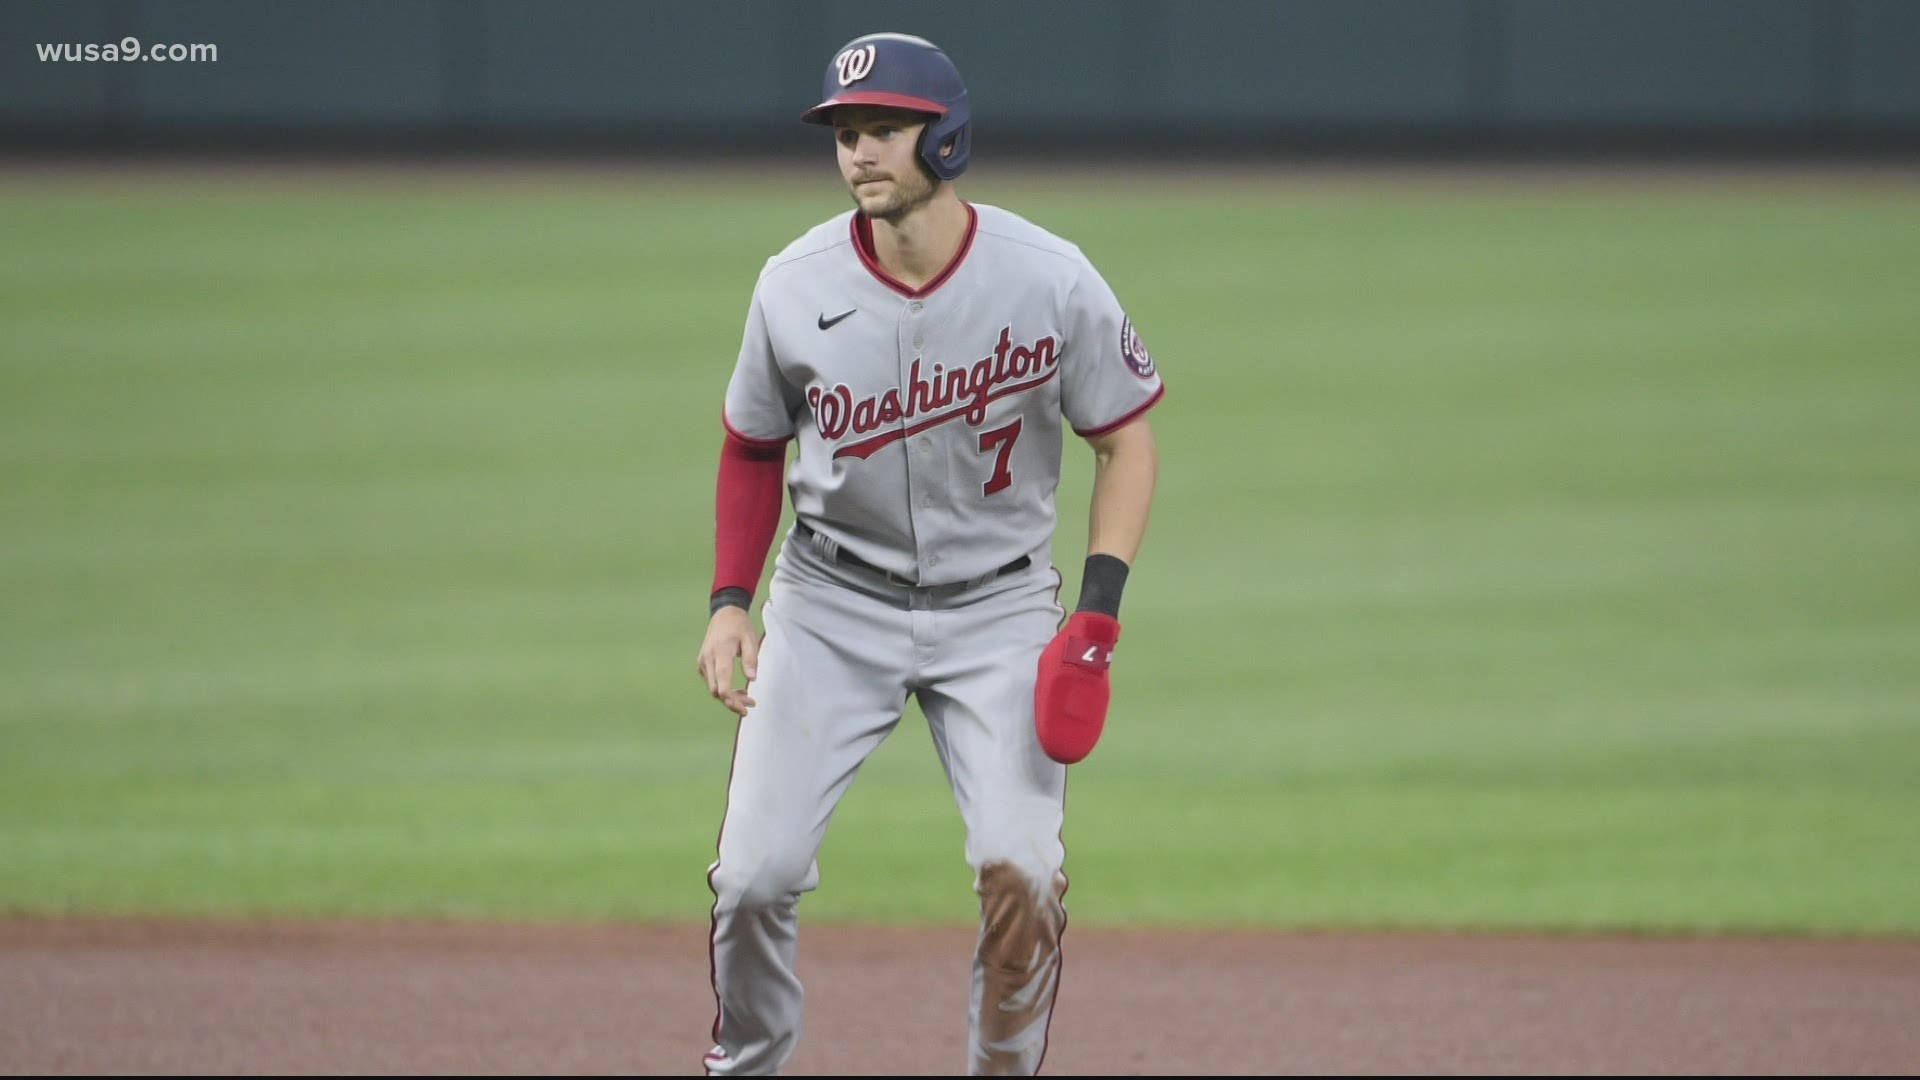 Trea Turner singled and scored in the first inning for the Washington Nationals before being pulled due to a positive COVID test.